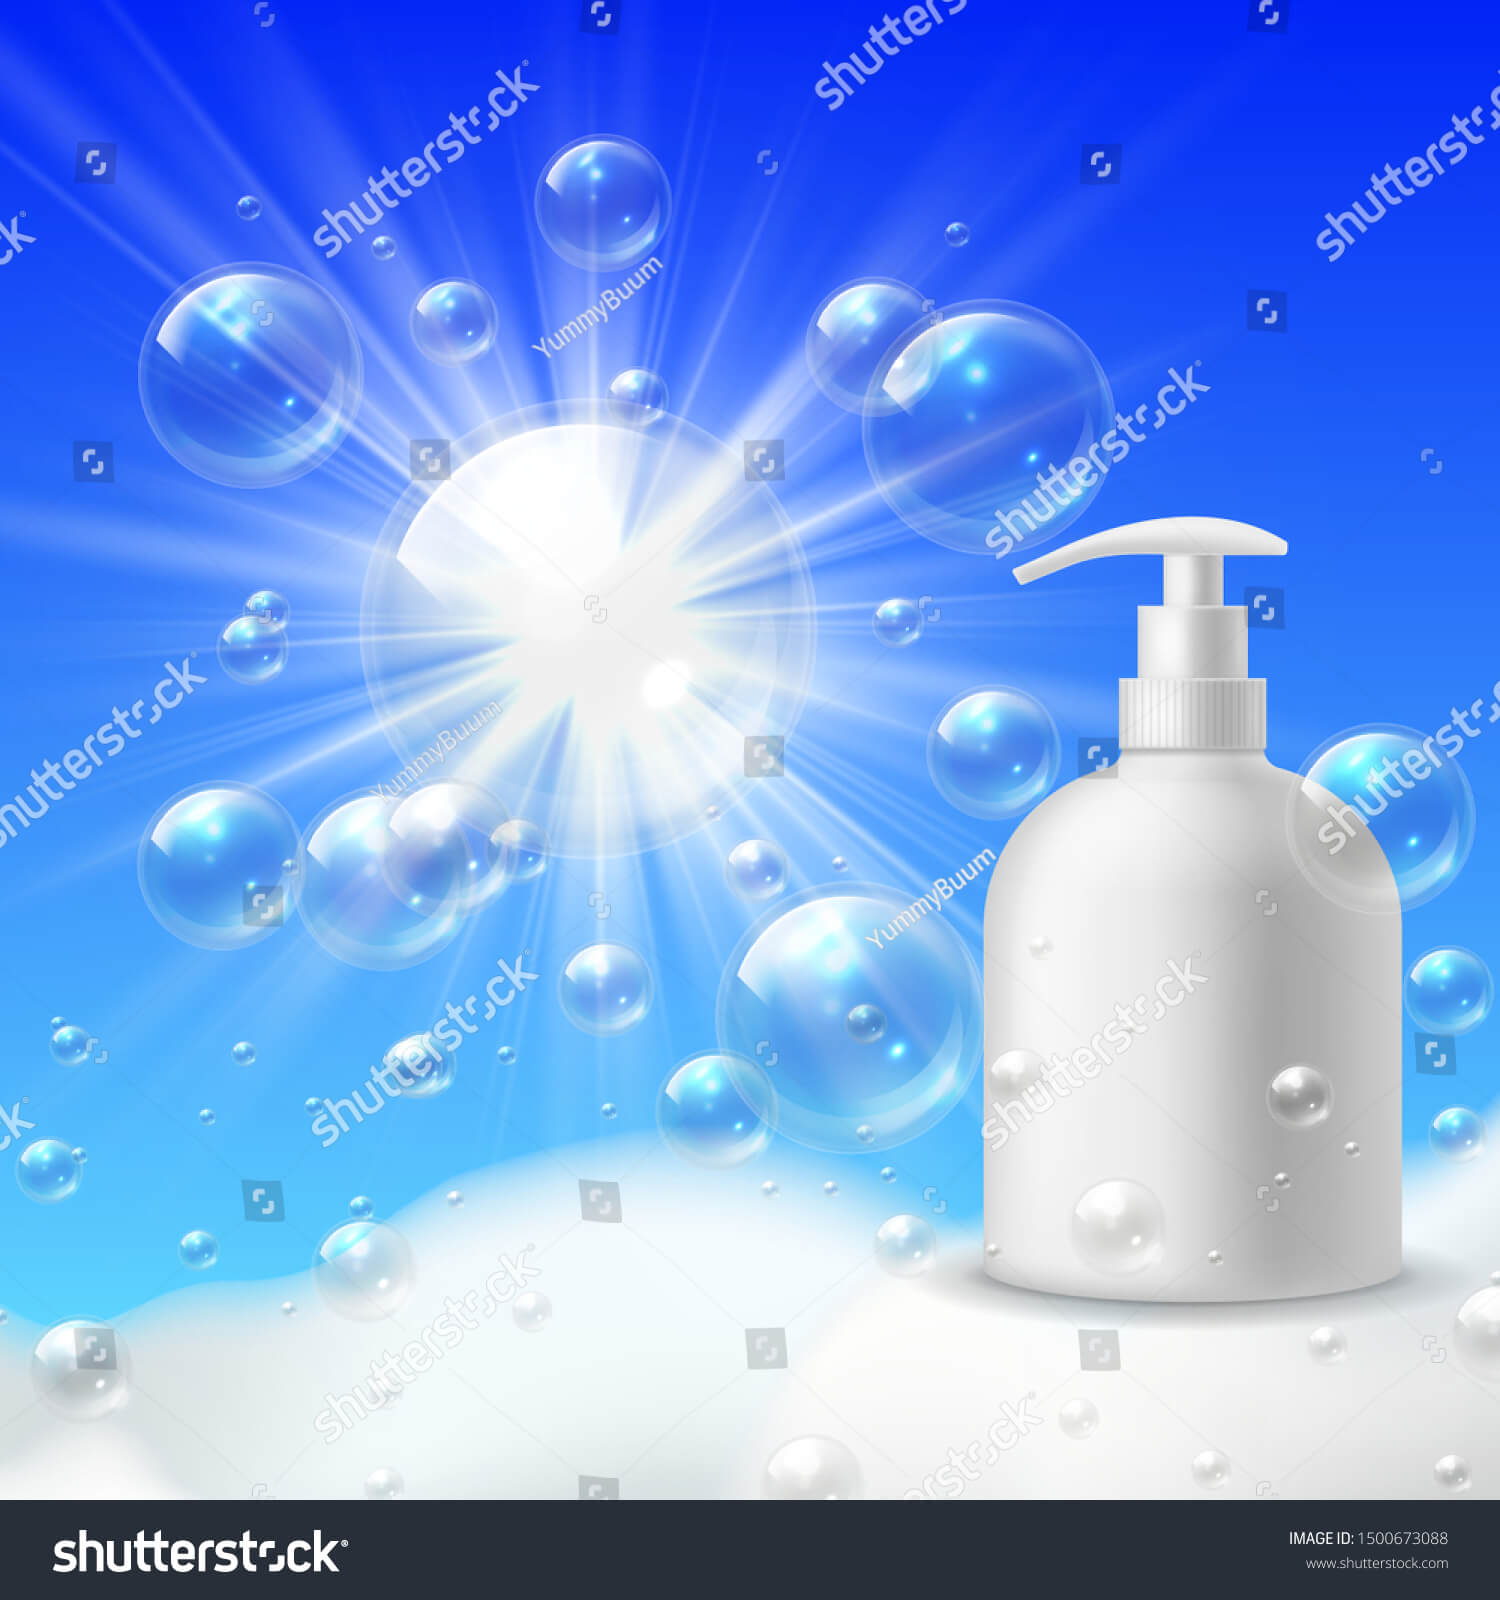 Foaming Wash Brand Clean Bubble Foam Stock Image | Download Now Within Bubble Bottle Label Template